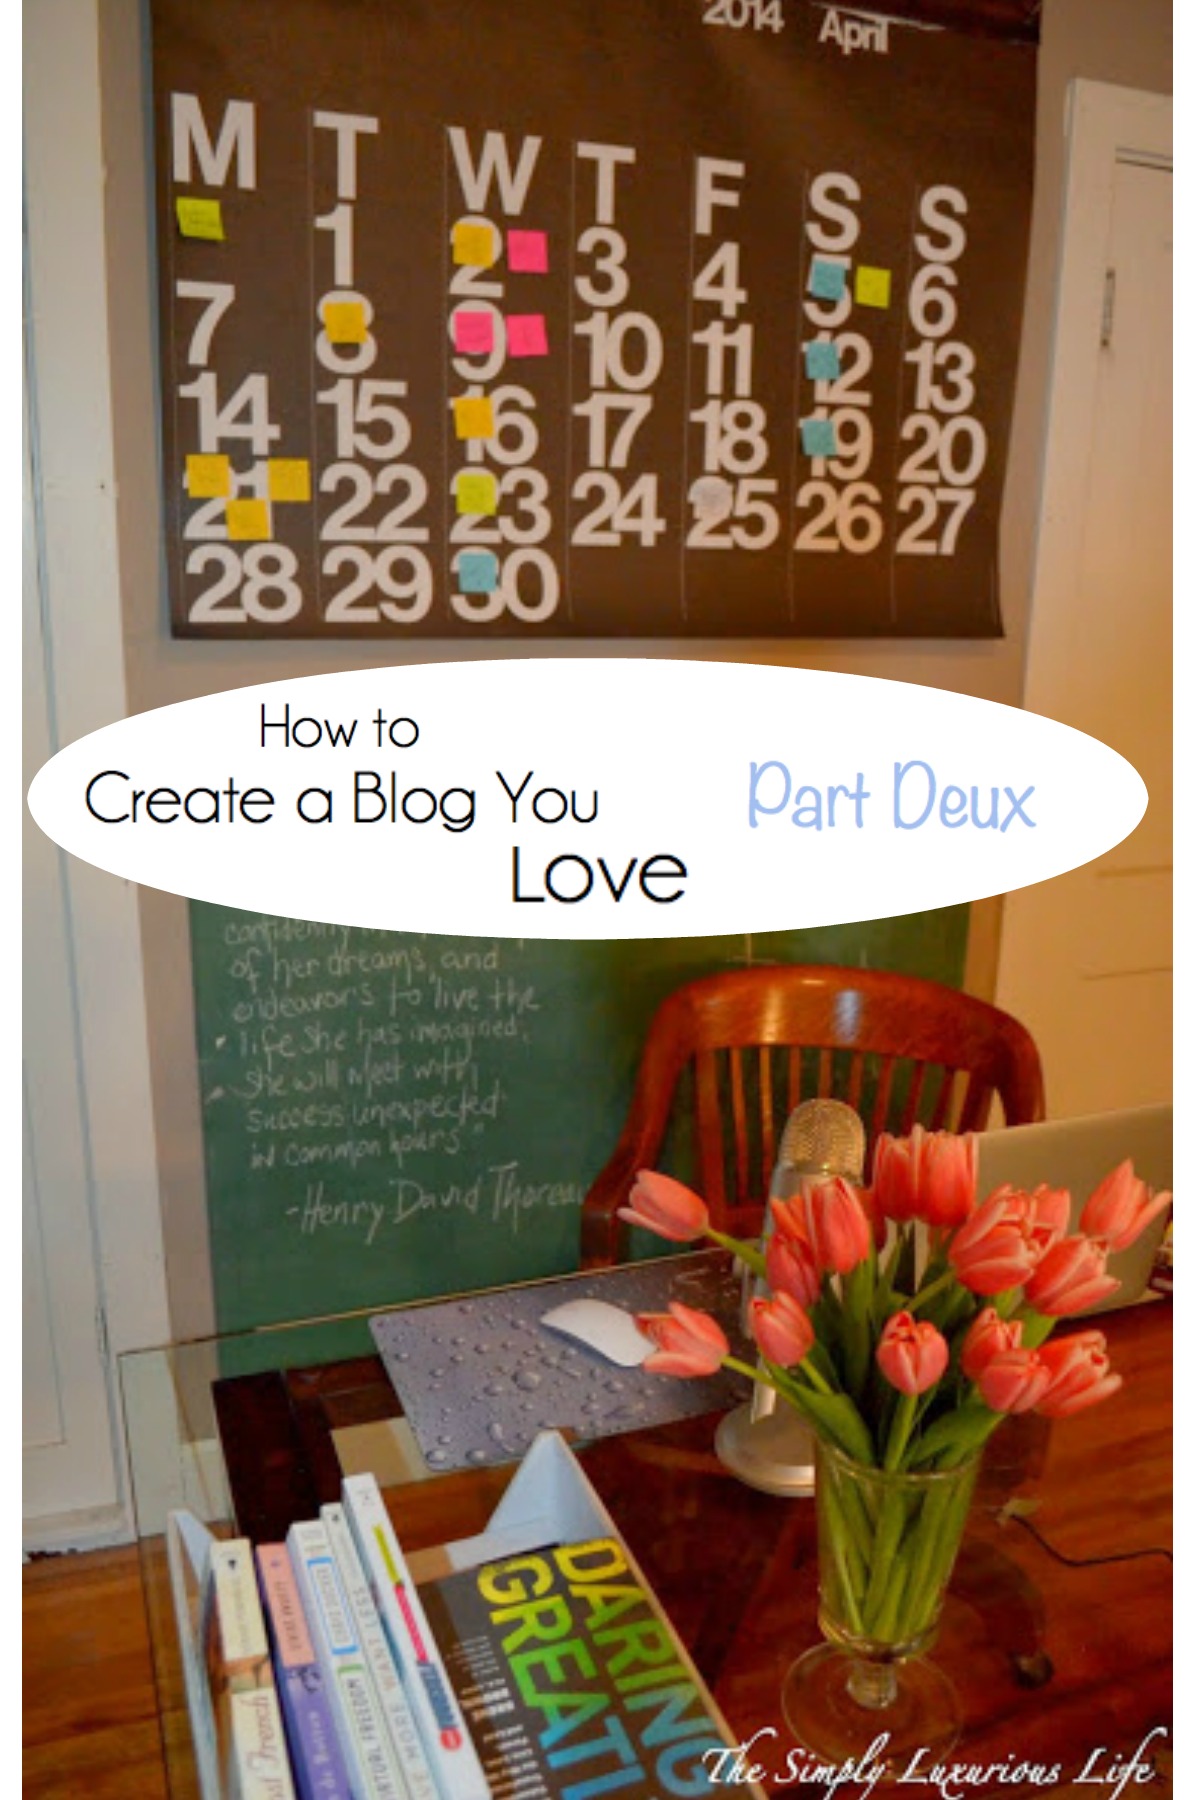 How to Create a Blog You Love, Part Deux